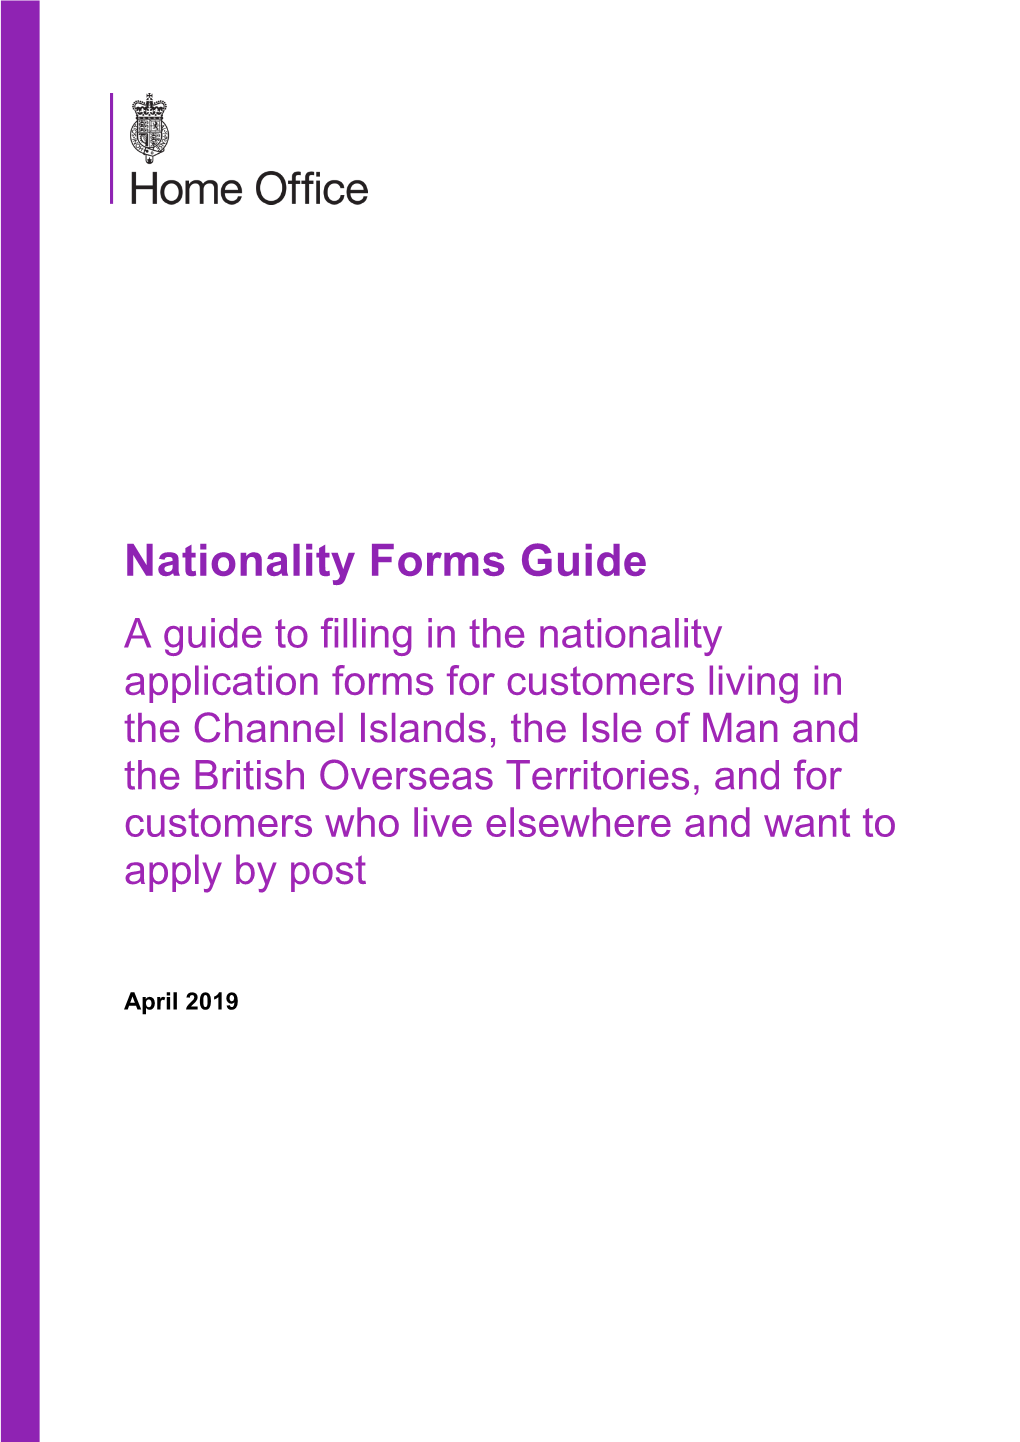 Nationality Forms Guide